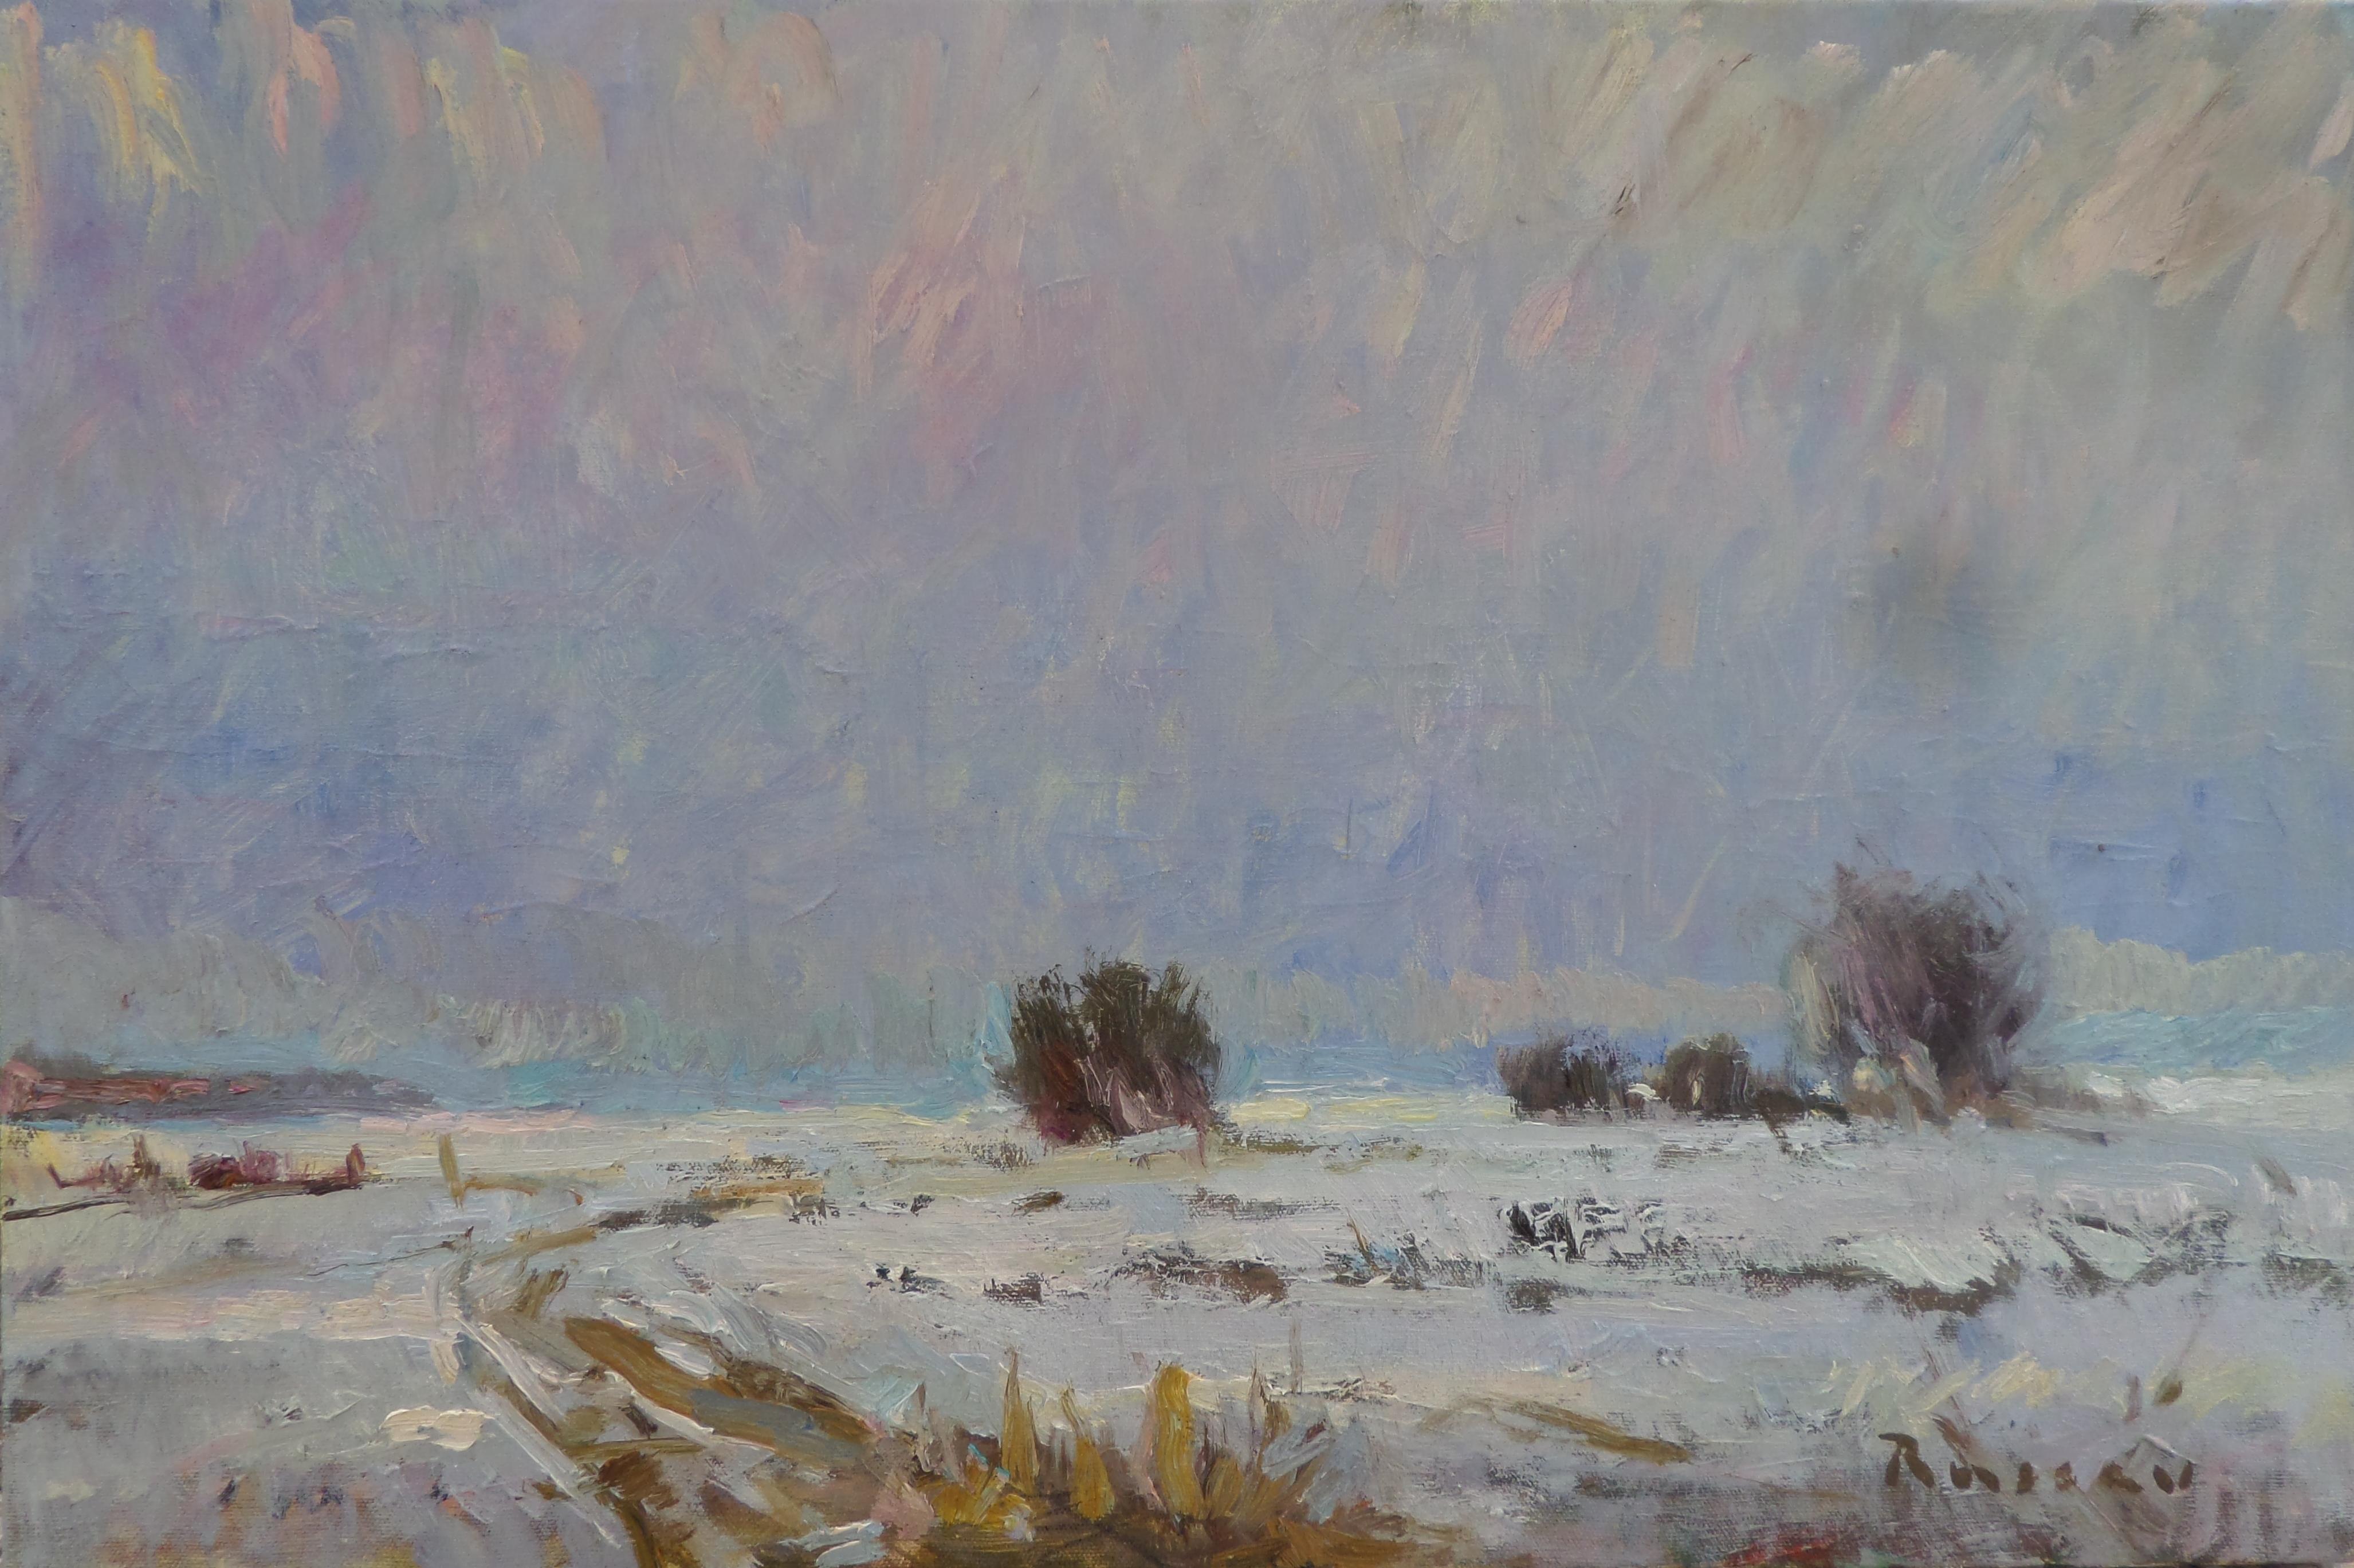 Ivan Roussev Landscape Painting - Winter - Landscape Oil Painting Colors Blue White Pink Brown Yellow Green